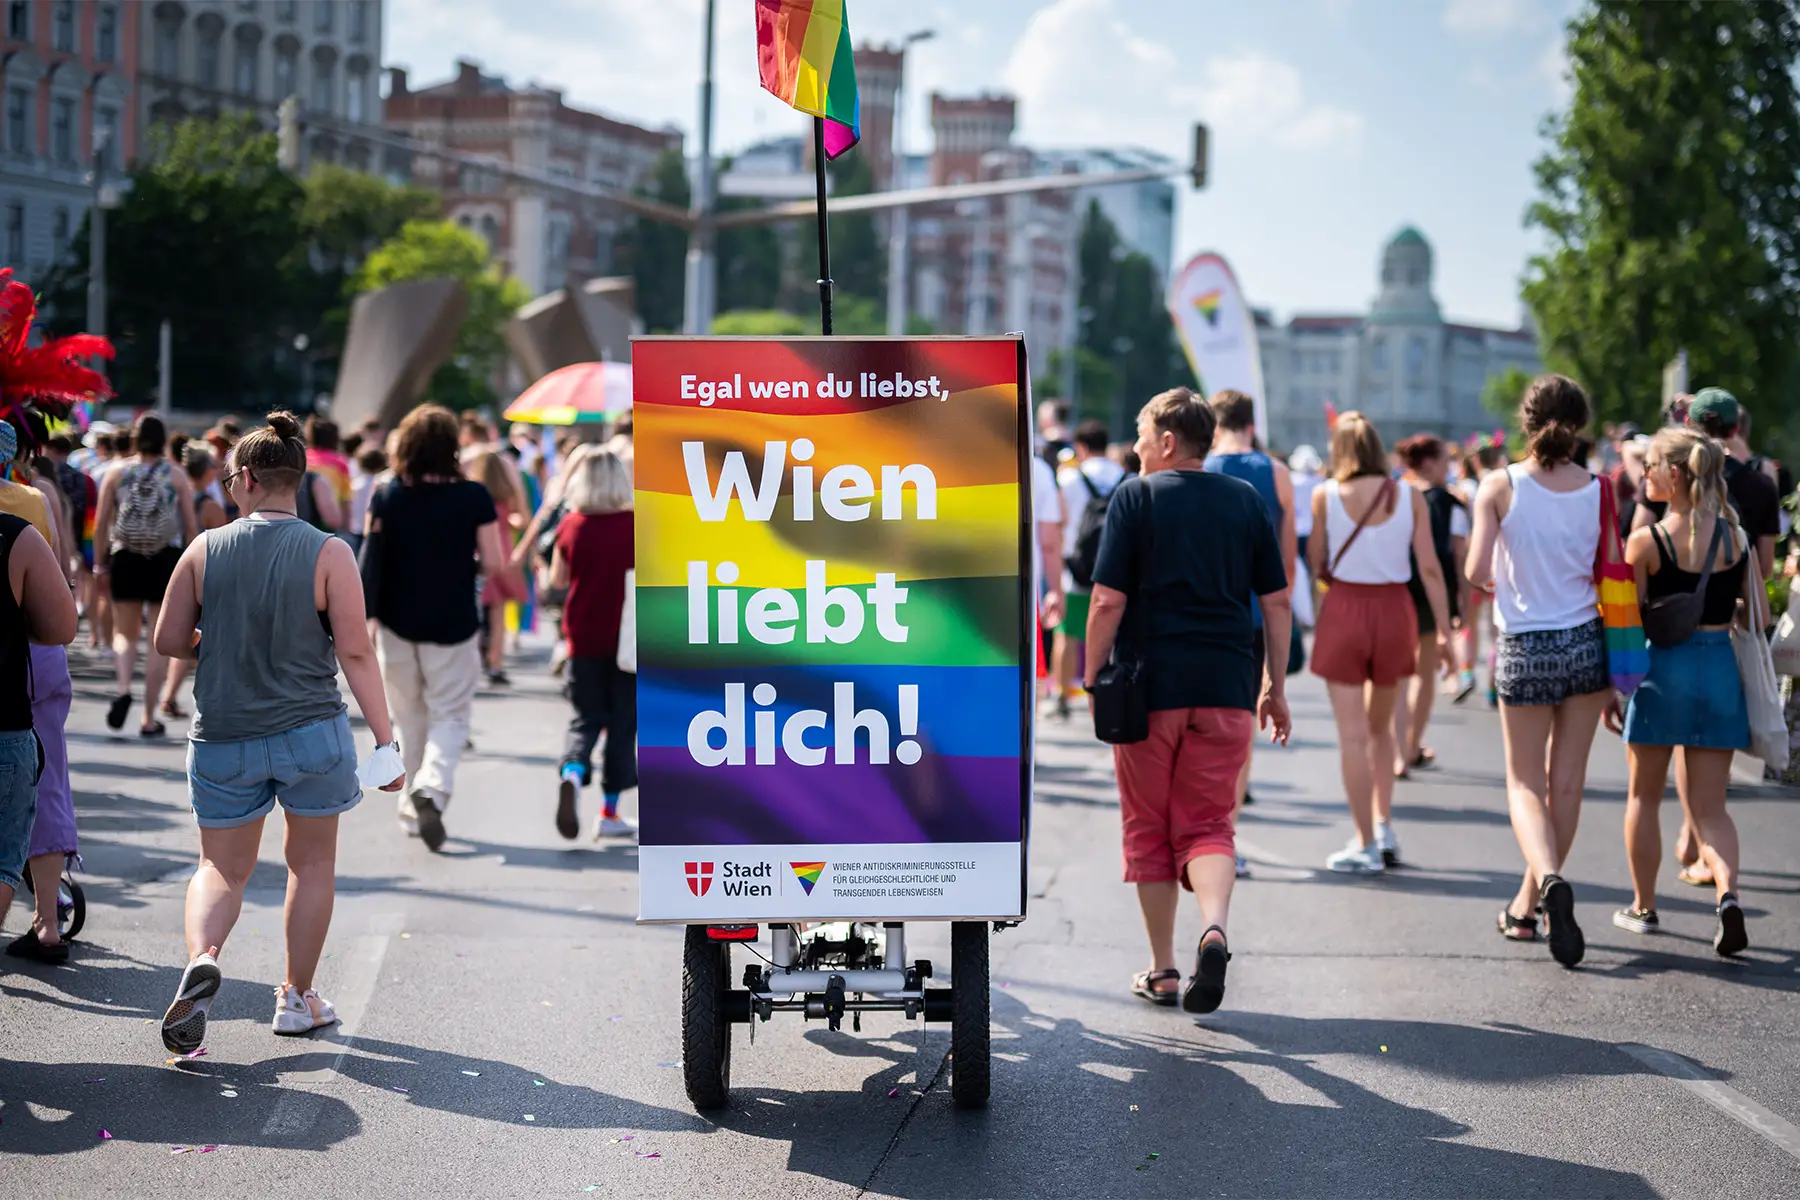 crowds marching in support of the LGBT community at Vienna Pride